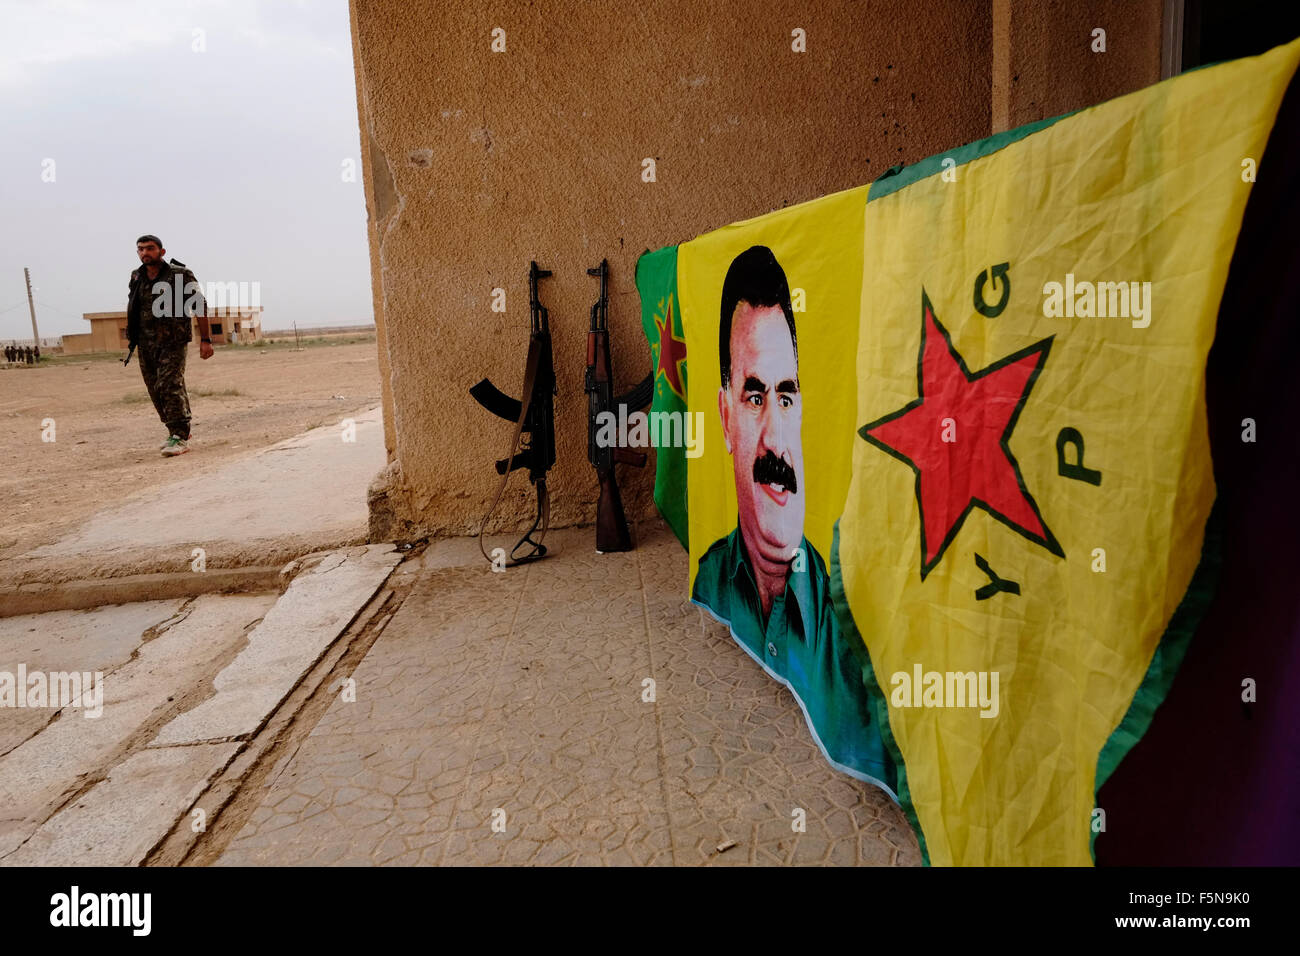 A flag bearing figure of former PKK militant leader Abdullah Ocalan is seen in a YPG Kurdish People's Protection Unit military compound in Al Hasakah or Hassakeh district or Rojava the de facto Kurdish autonomous region originating in and consisting of three self-governing cantons in northern Syria Stock Photo